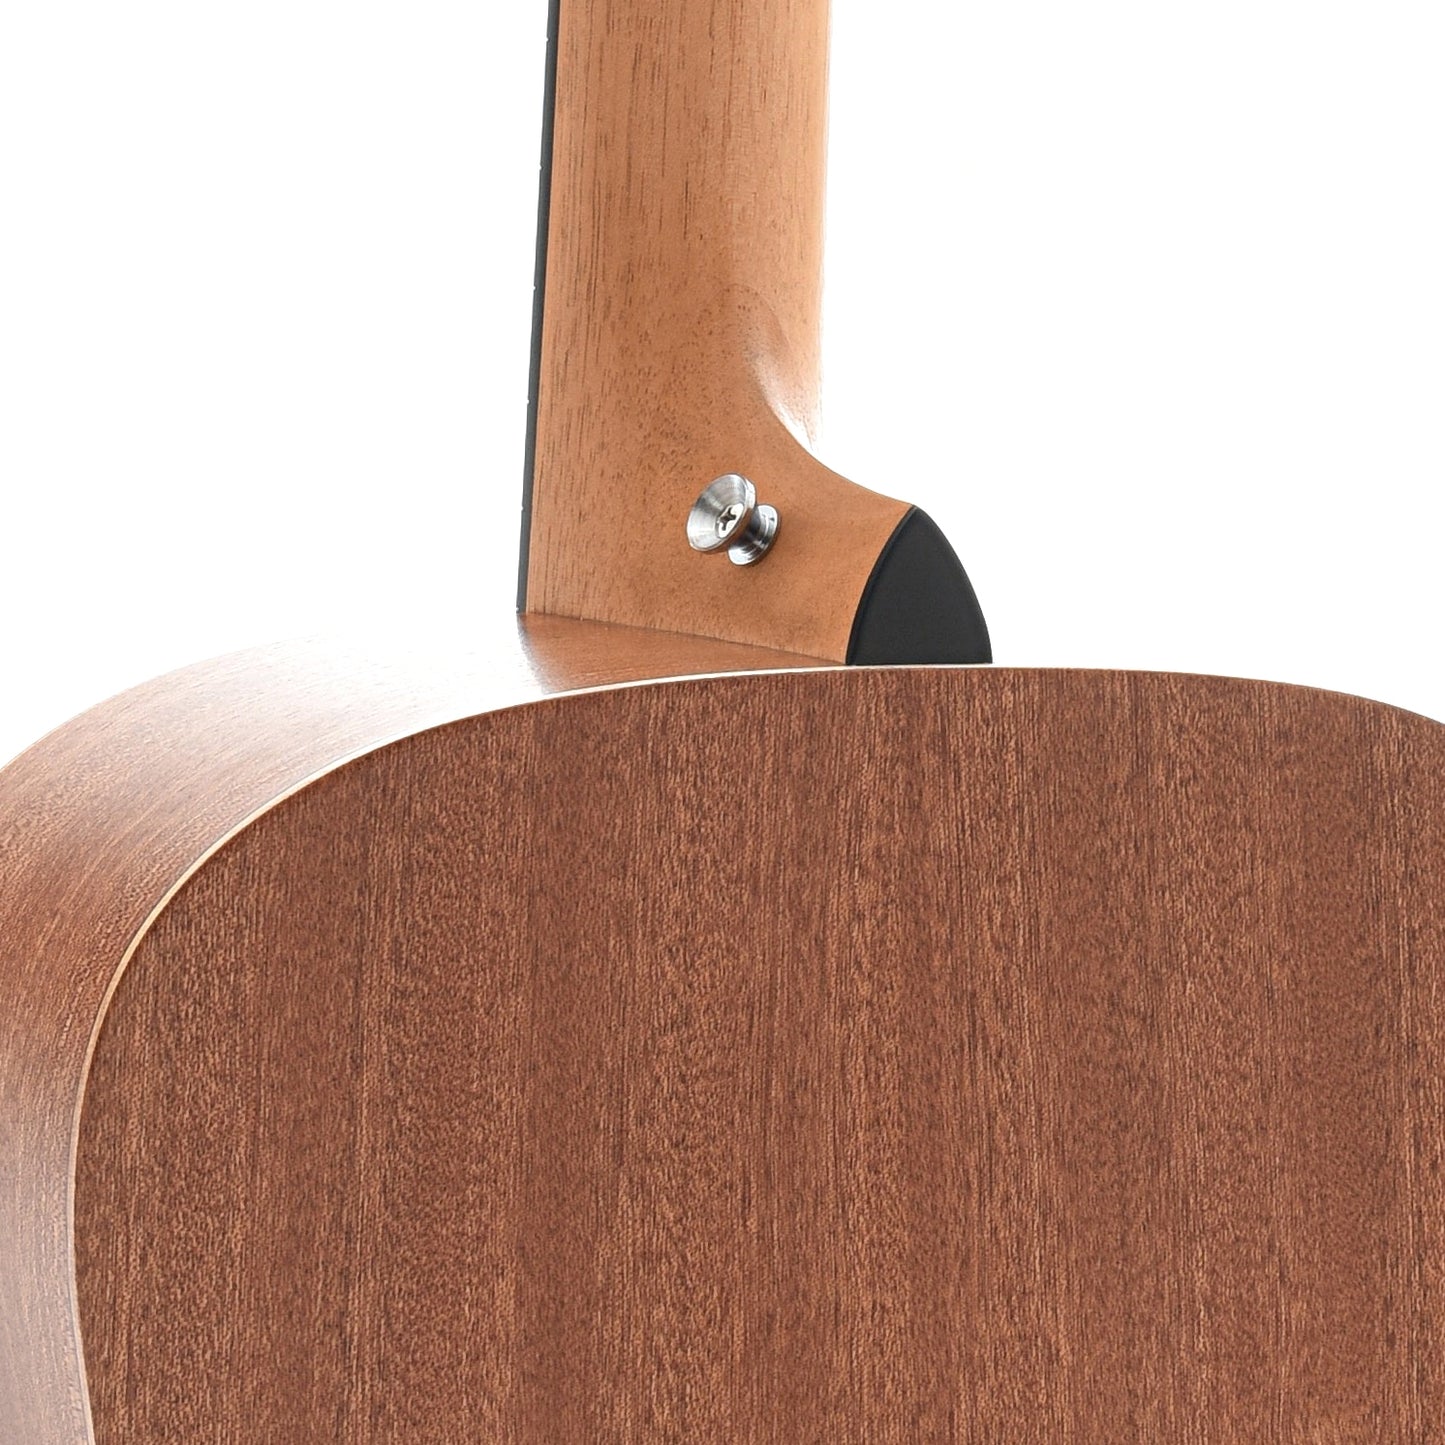 Neck Joint of Taylor Academy 10e Acoustic Guitar